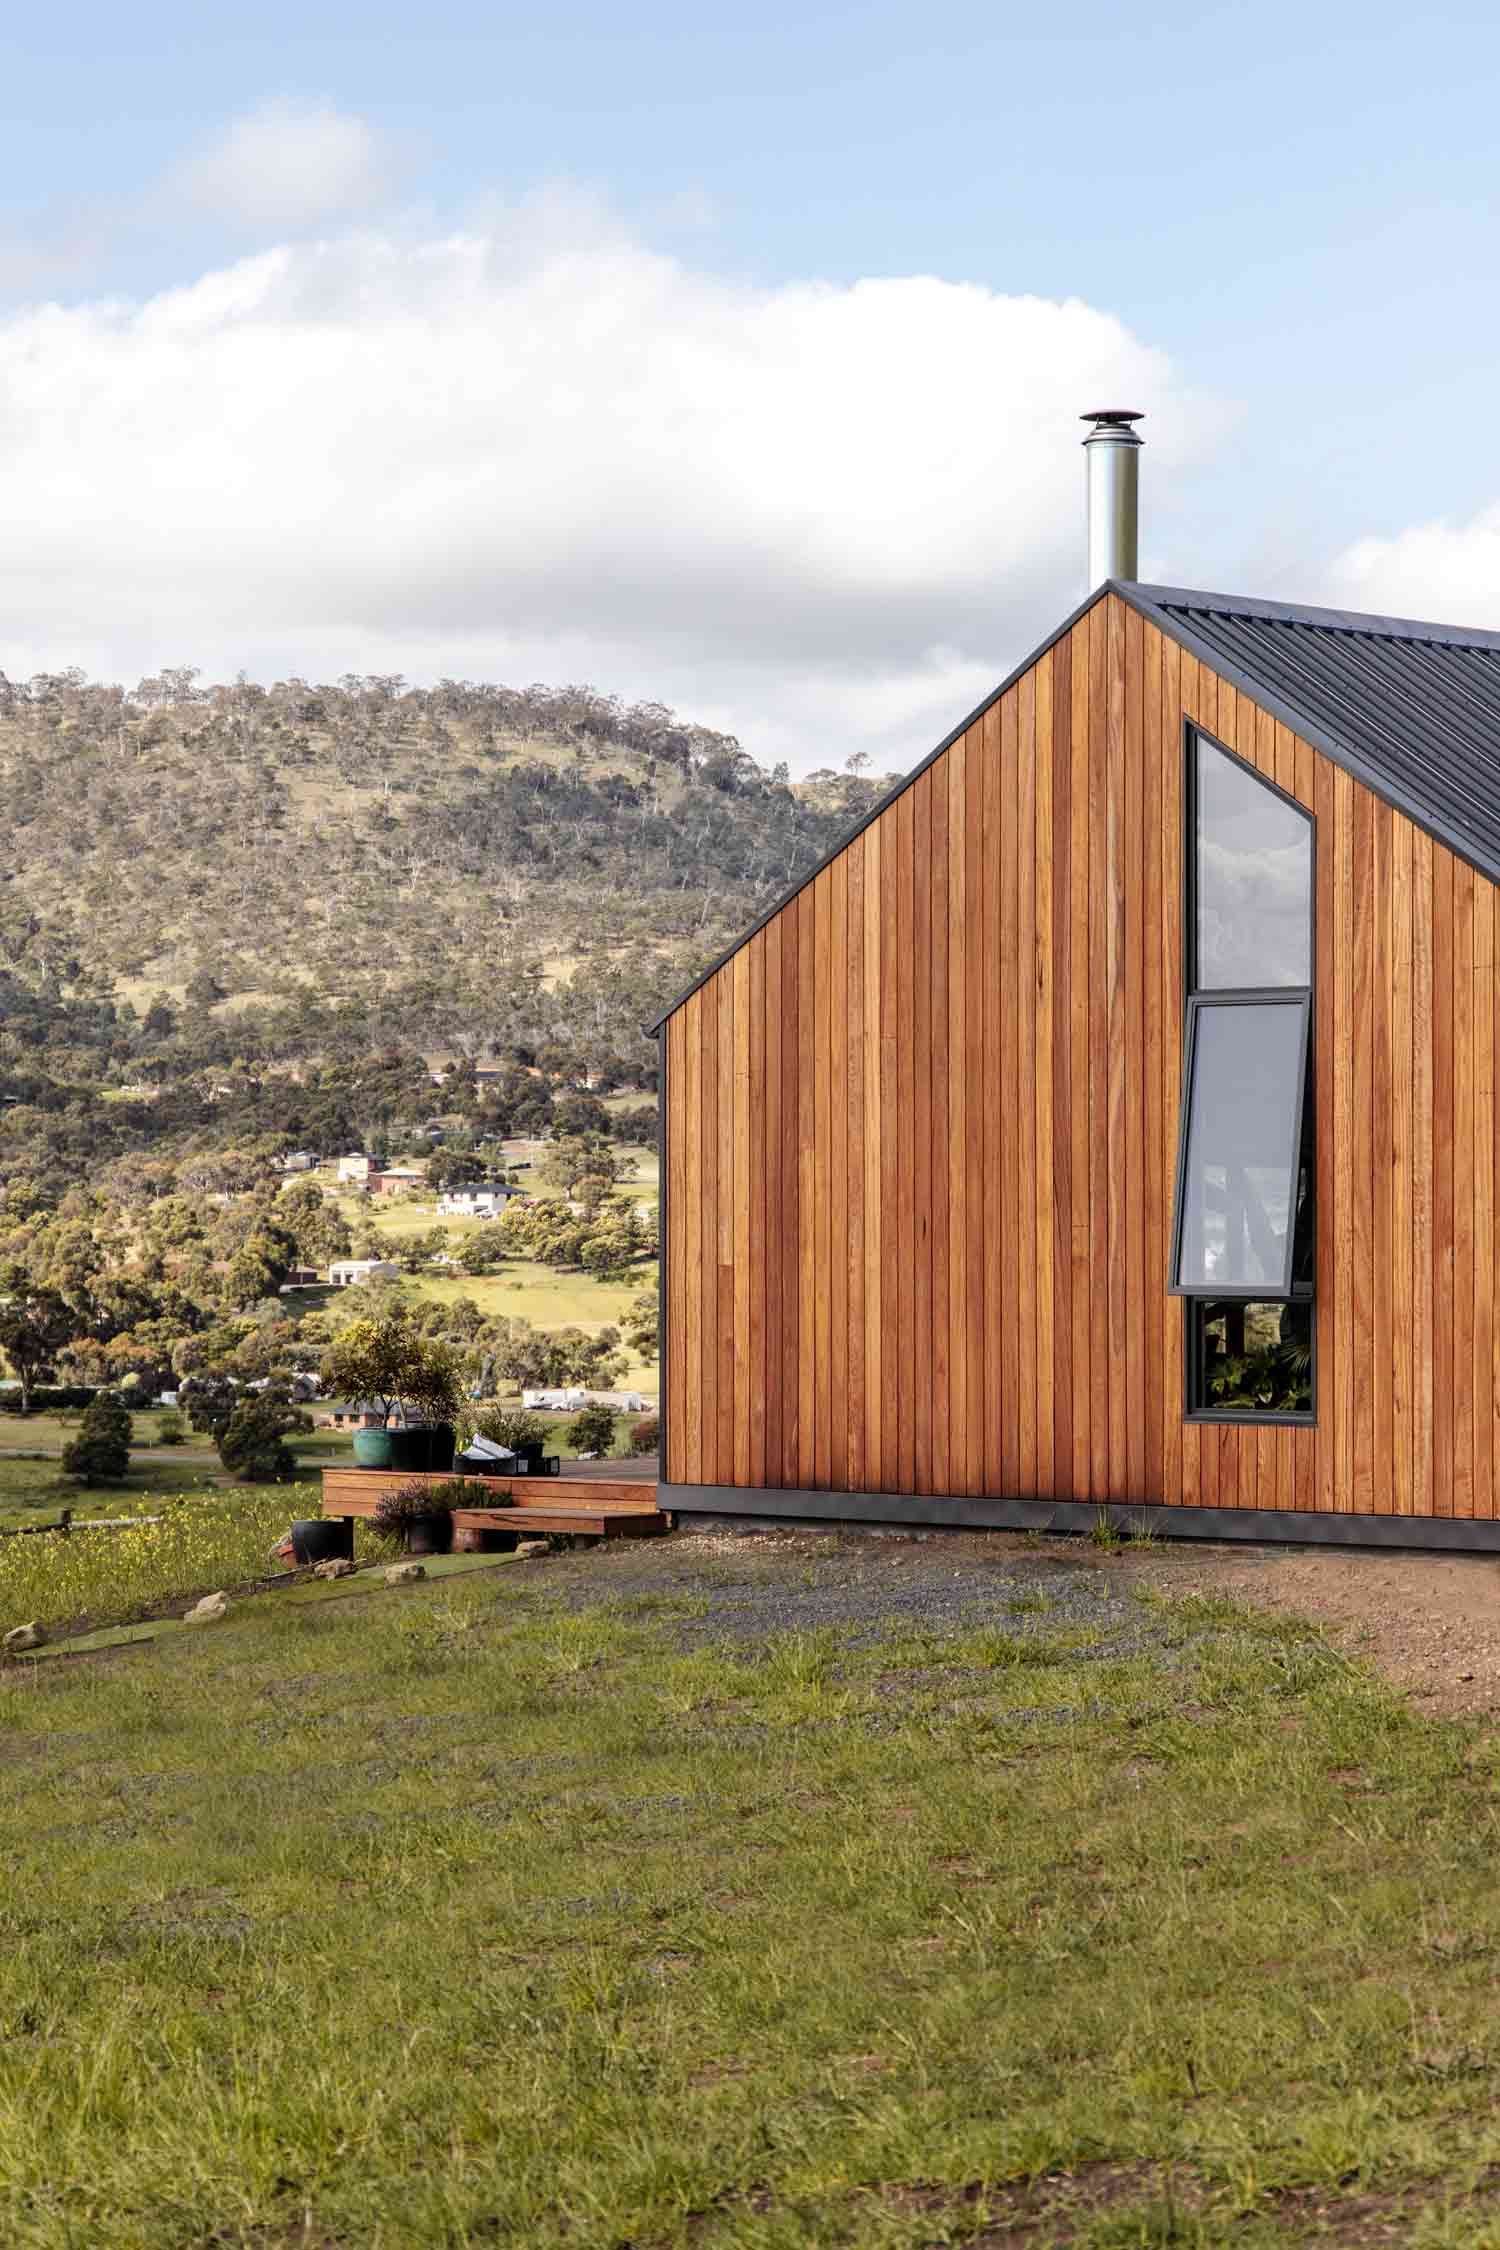 Barndominium-home-in-a-country-location-with-timber-panelling